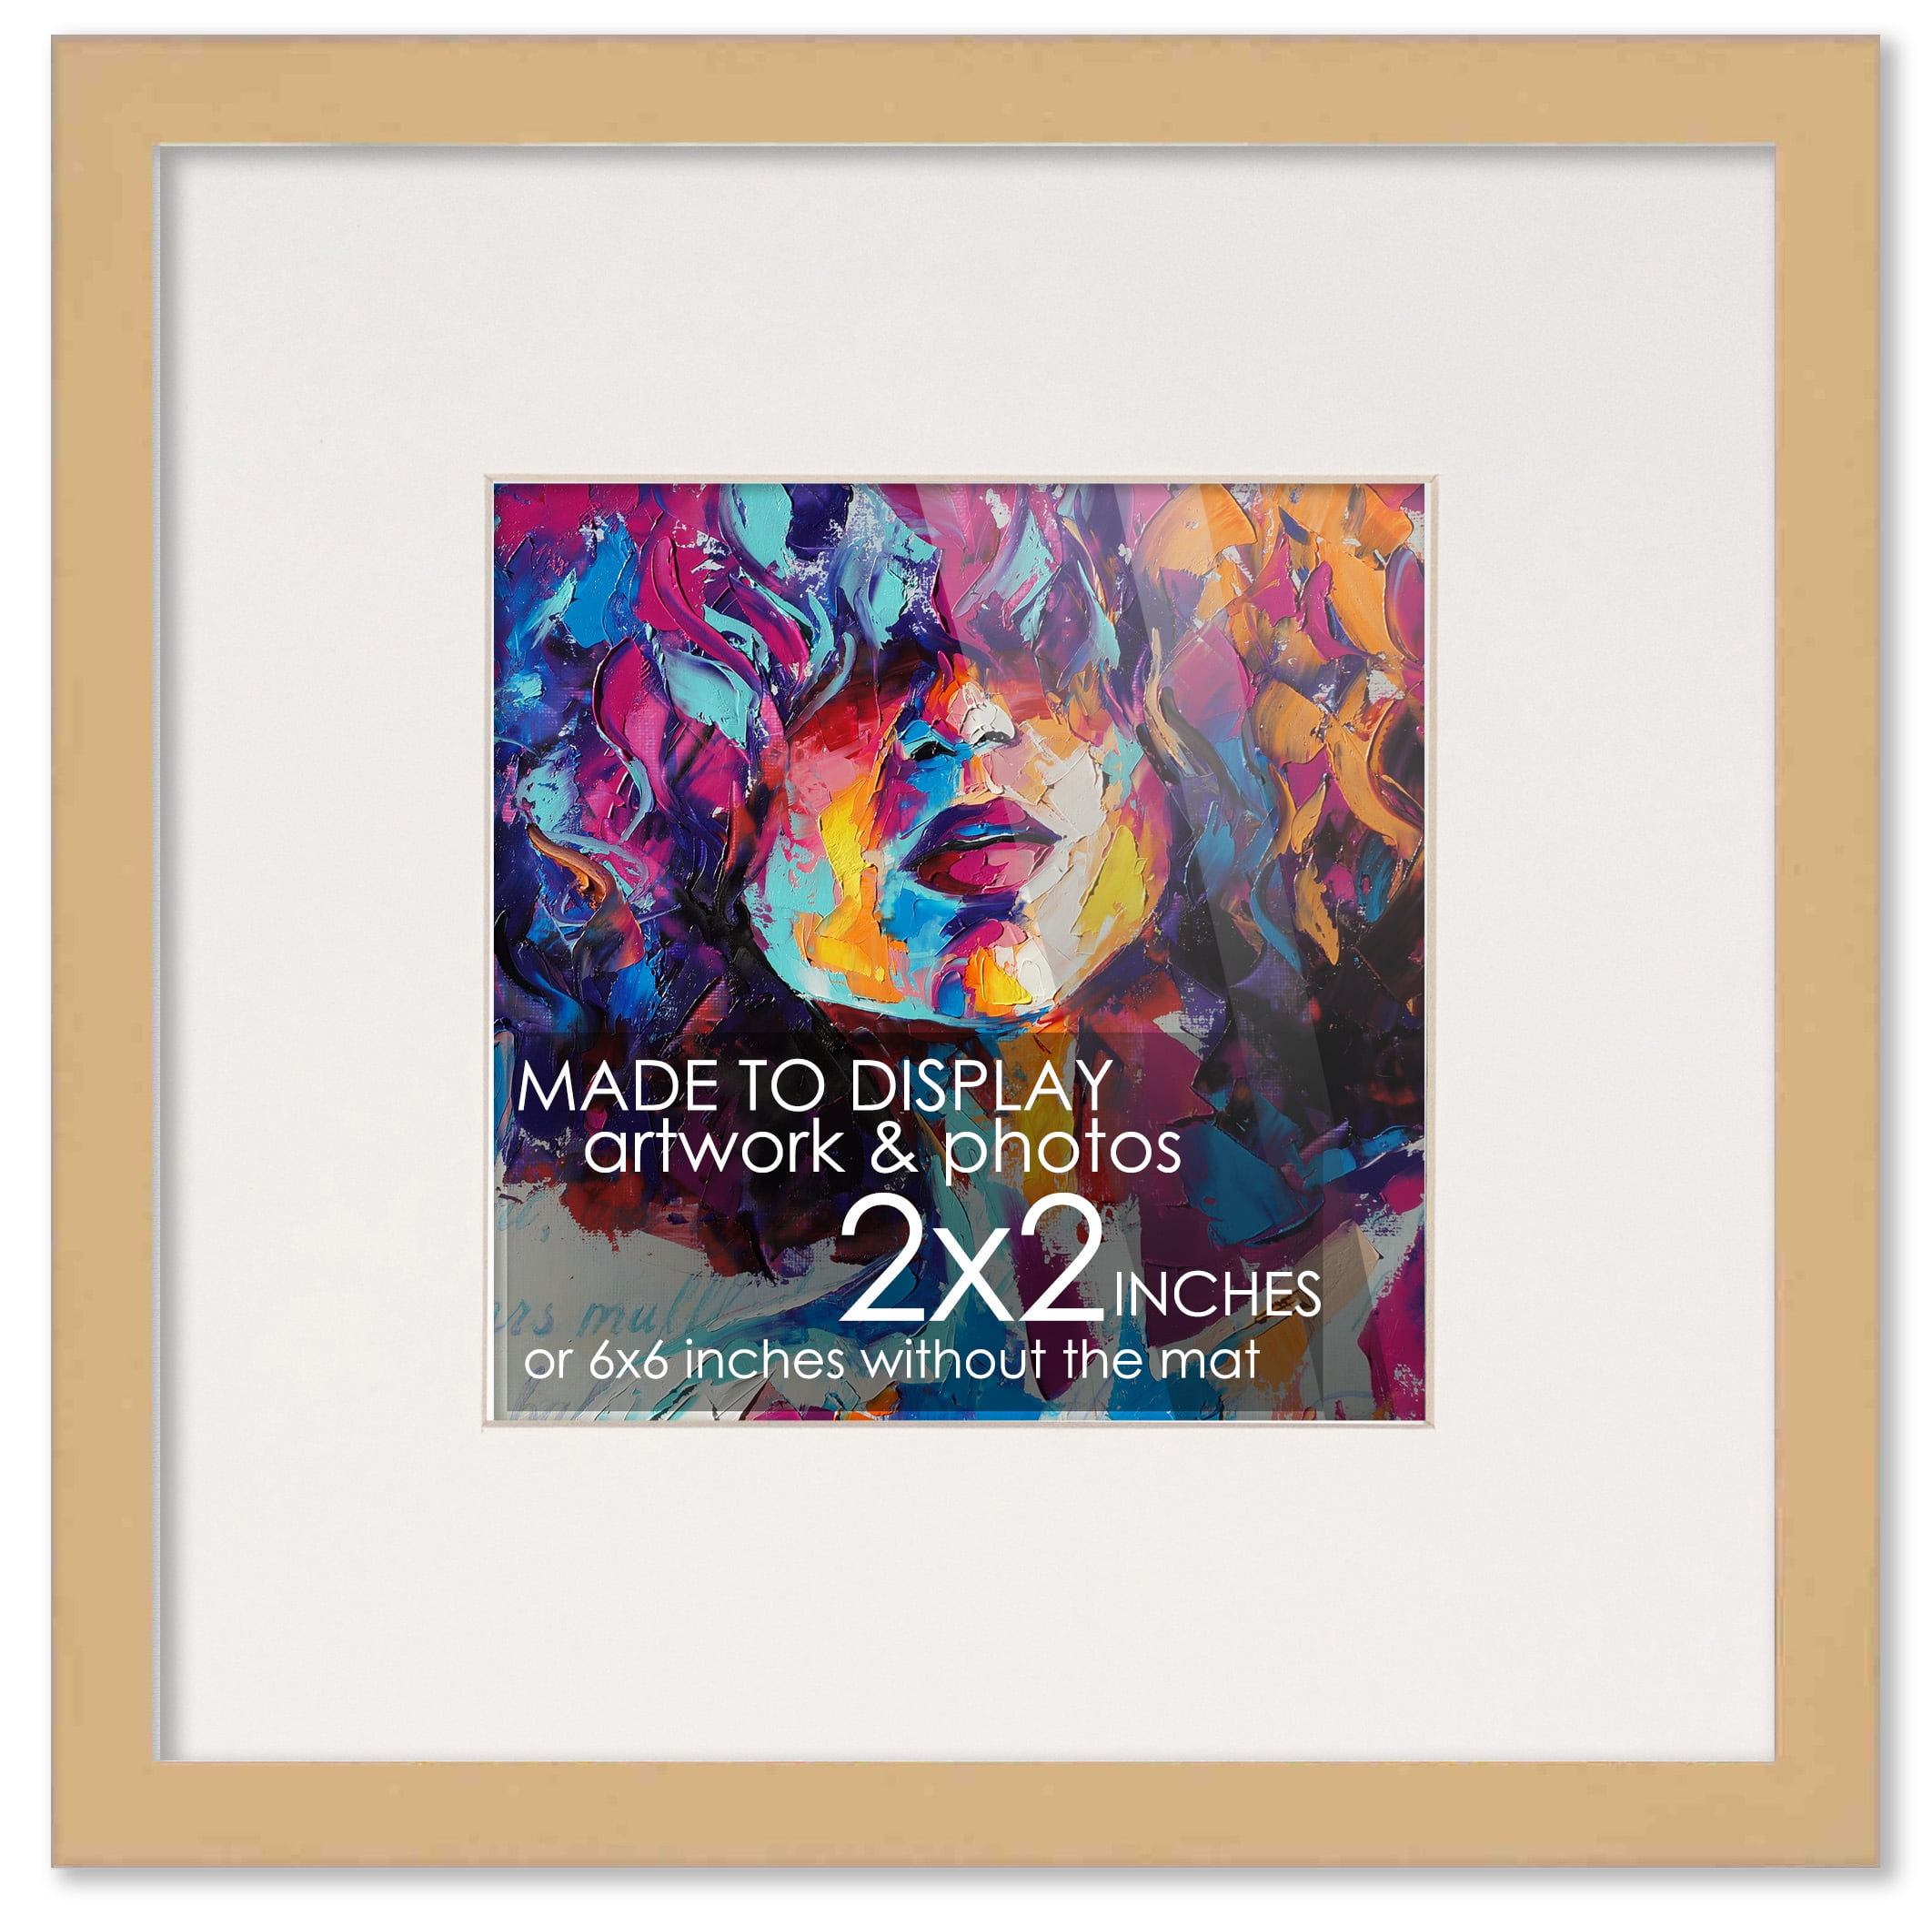 20x20 Frame White with White Picture Mat for 20x20 Print - or 22X22 Art Without The Photo Mat - Display Your 20x20, Size: 20 x 20